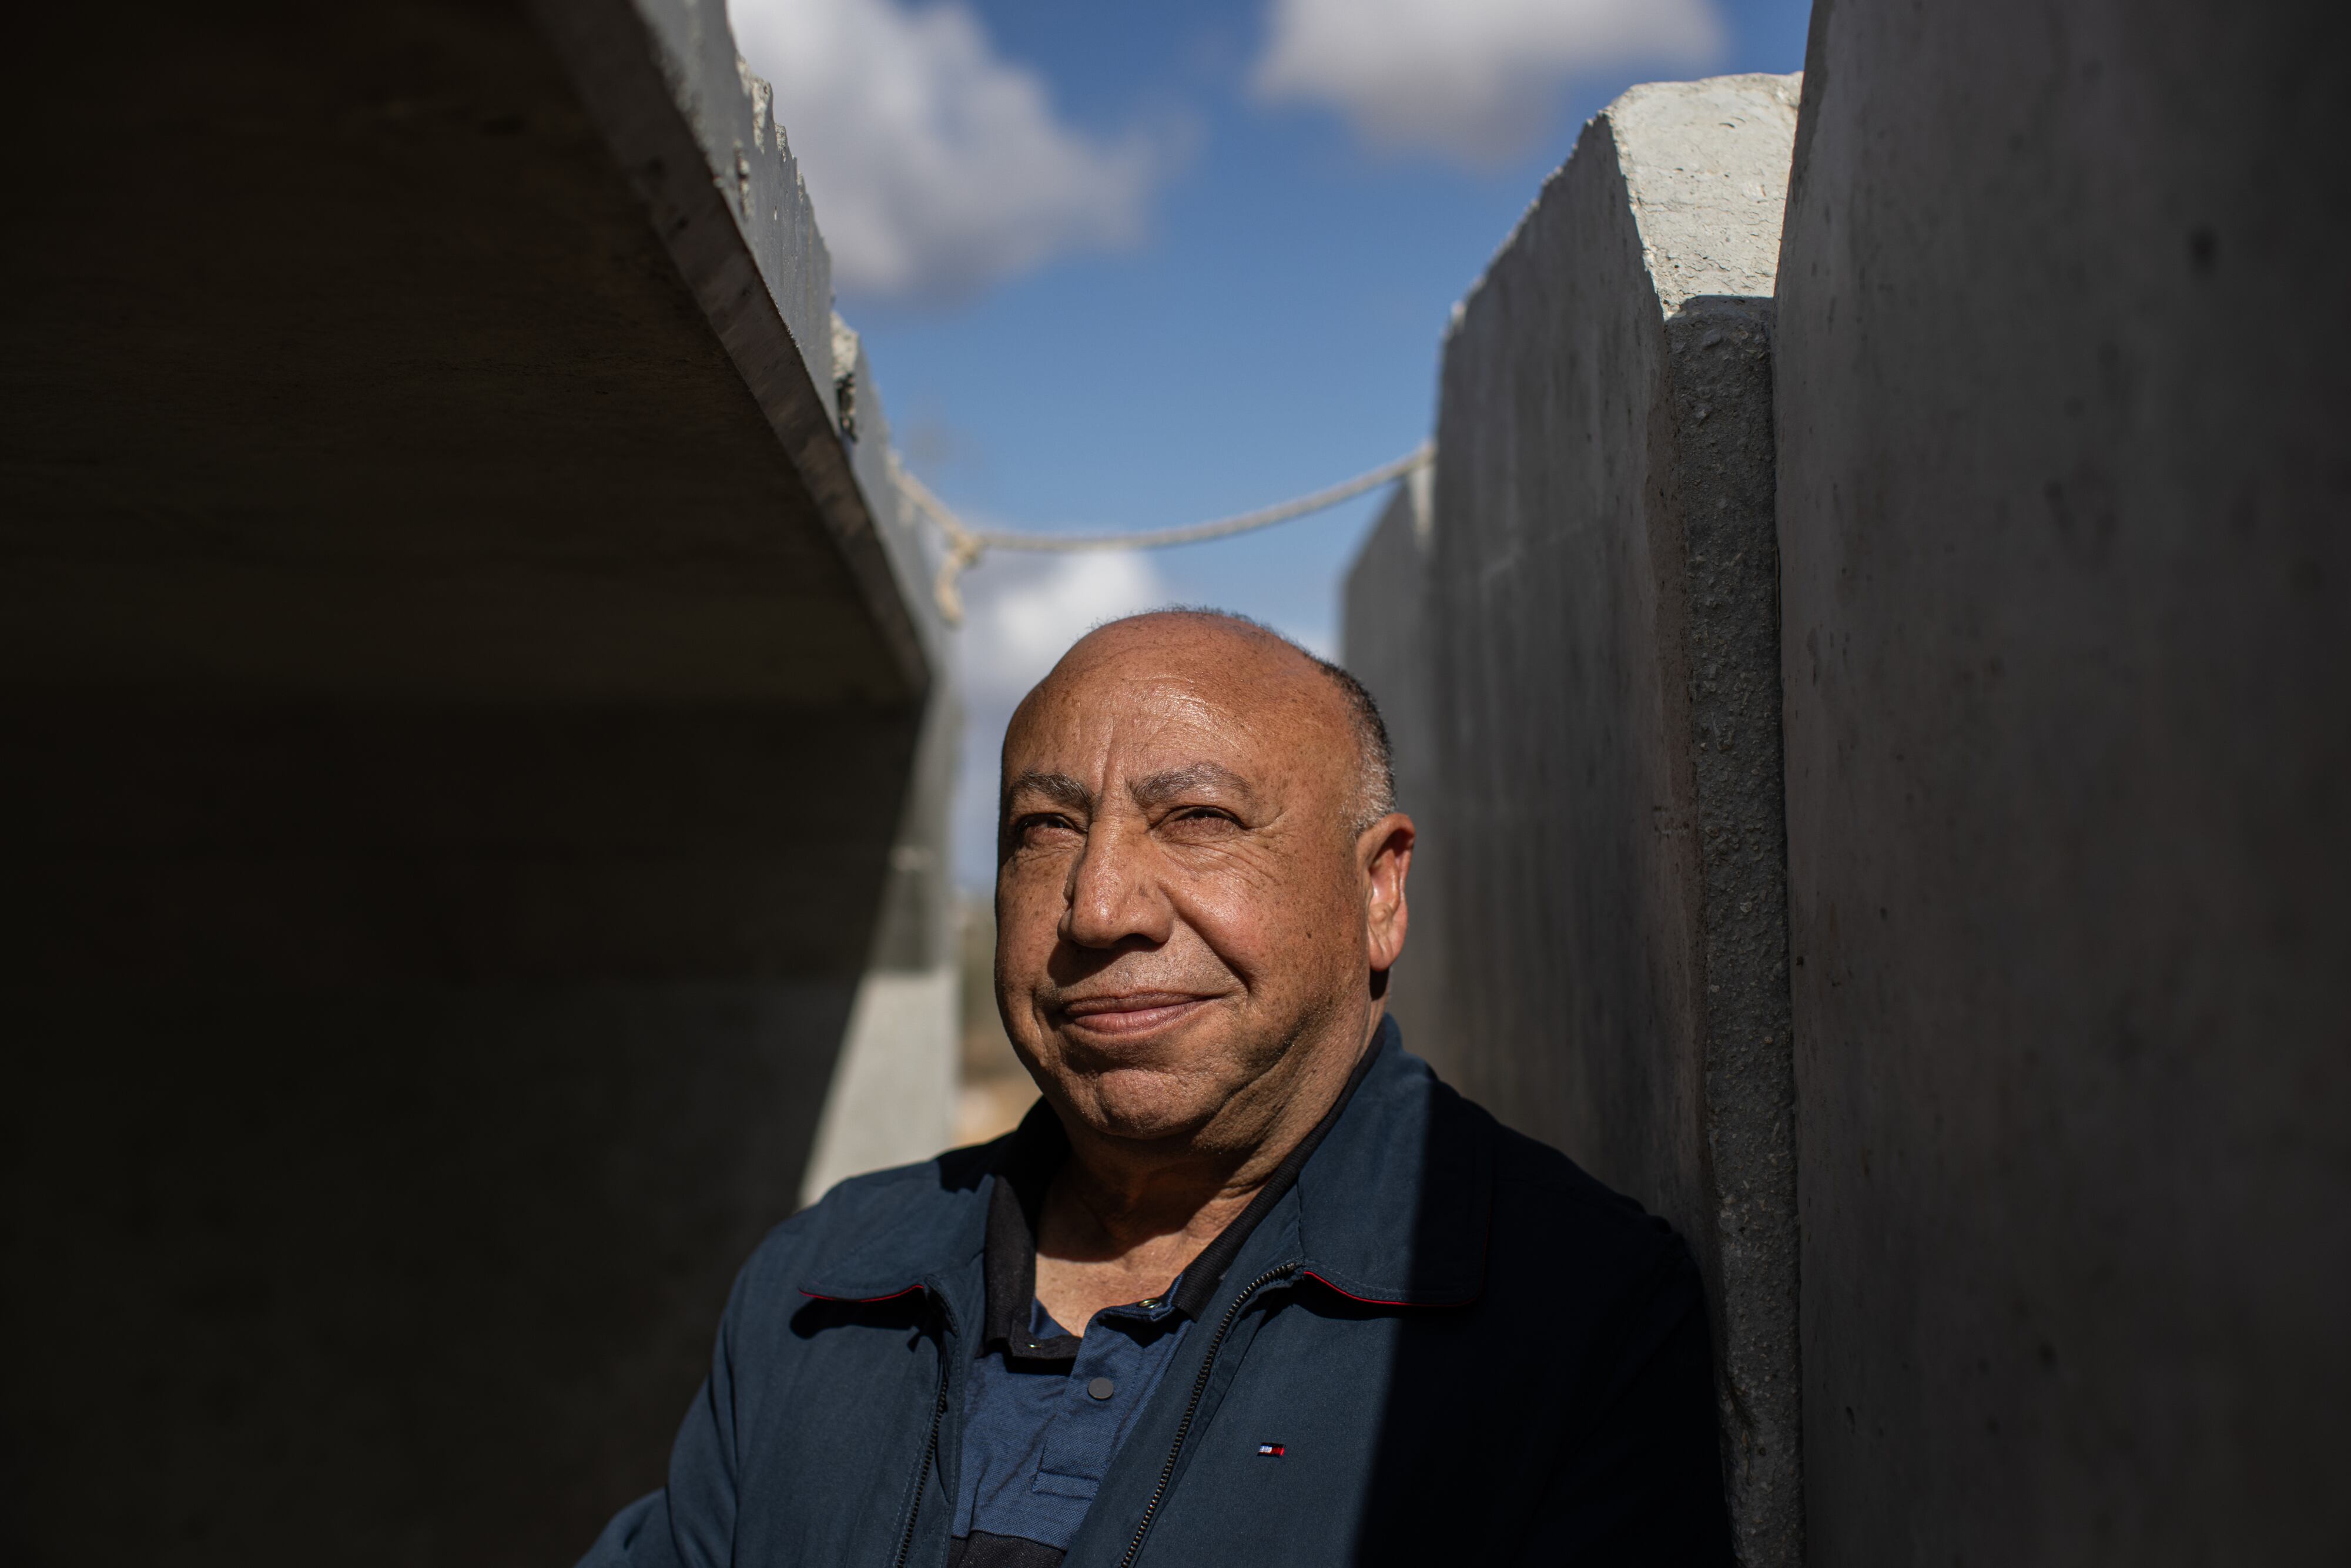 Kher Albaz, chairman of the board of AJEEC, an organization promoting Arab-Jewish equality and cooperation in the Negev Desert, stands in a concrete shelter in the unrecognized Bedouin village of Wadi al-Na'am in southern Israel.